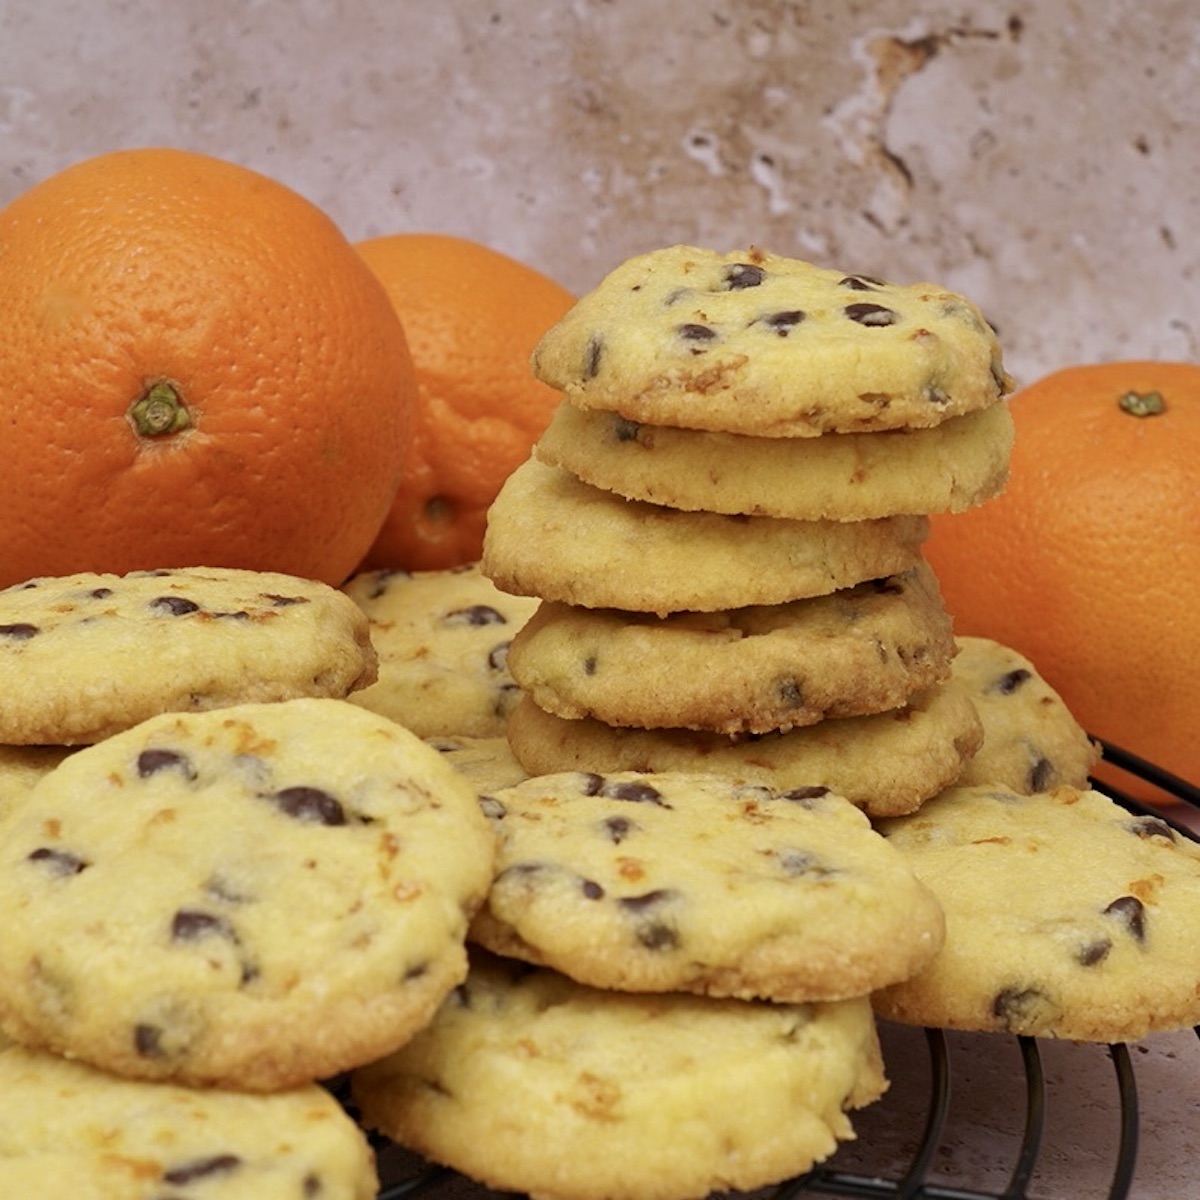 A stack of homemade chocolate orange shortbread biscuits with oranges behind.